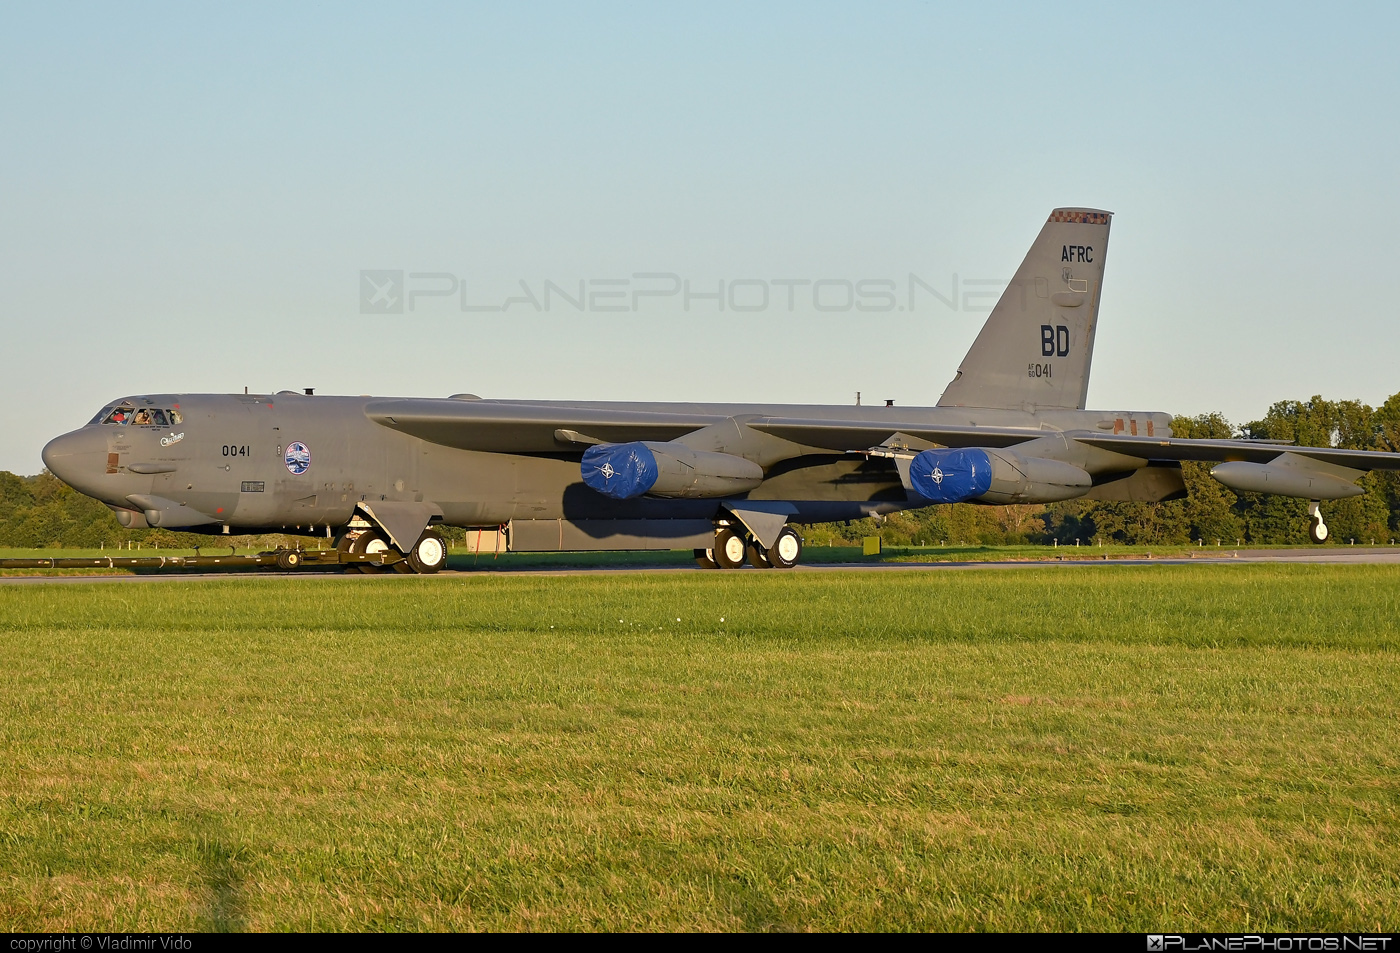 Boeing B-52H Stratofortress - 60-0041 operated by US Air Force (USAF) #b52 #boeing #stratofortress #usaf #usairforce